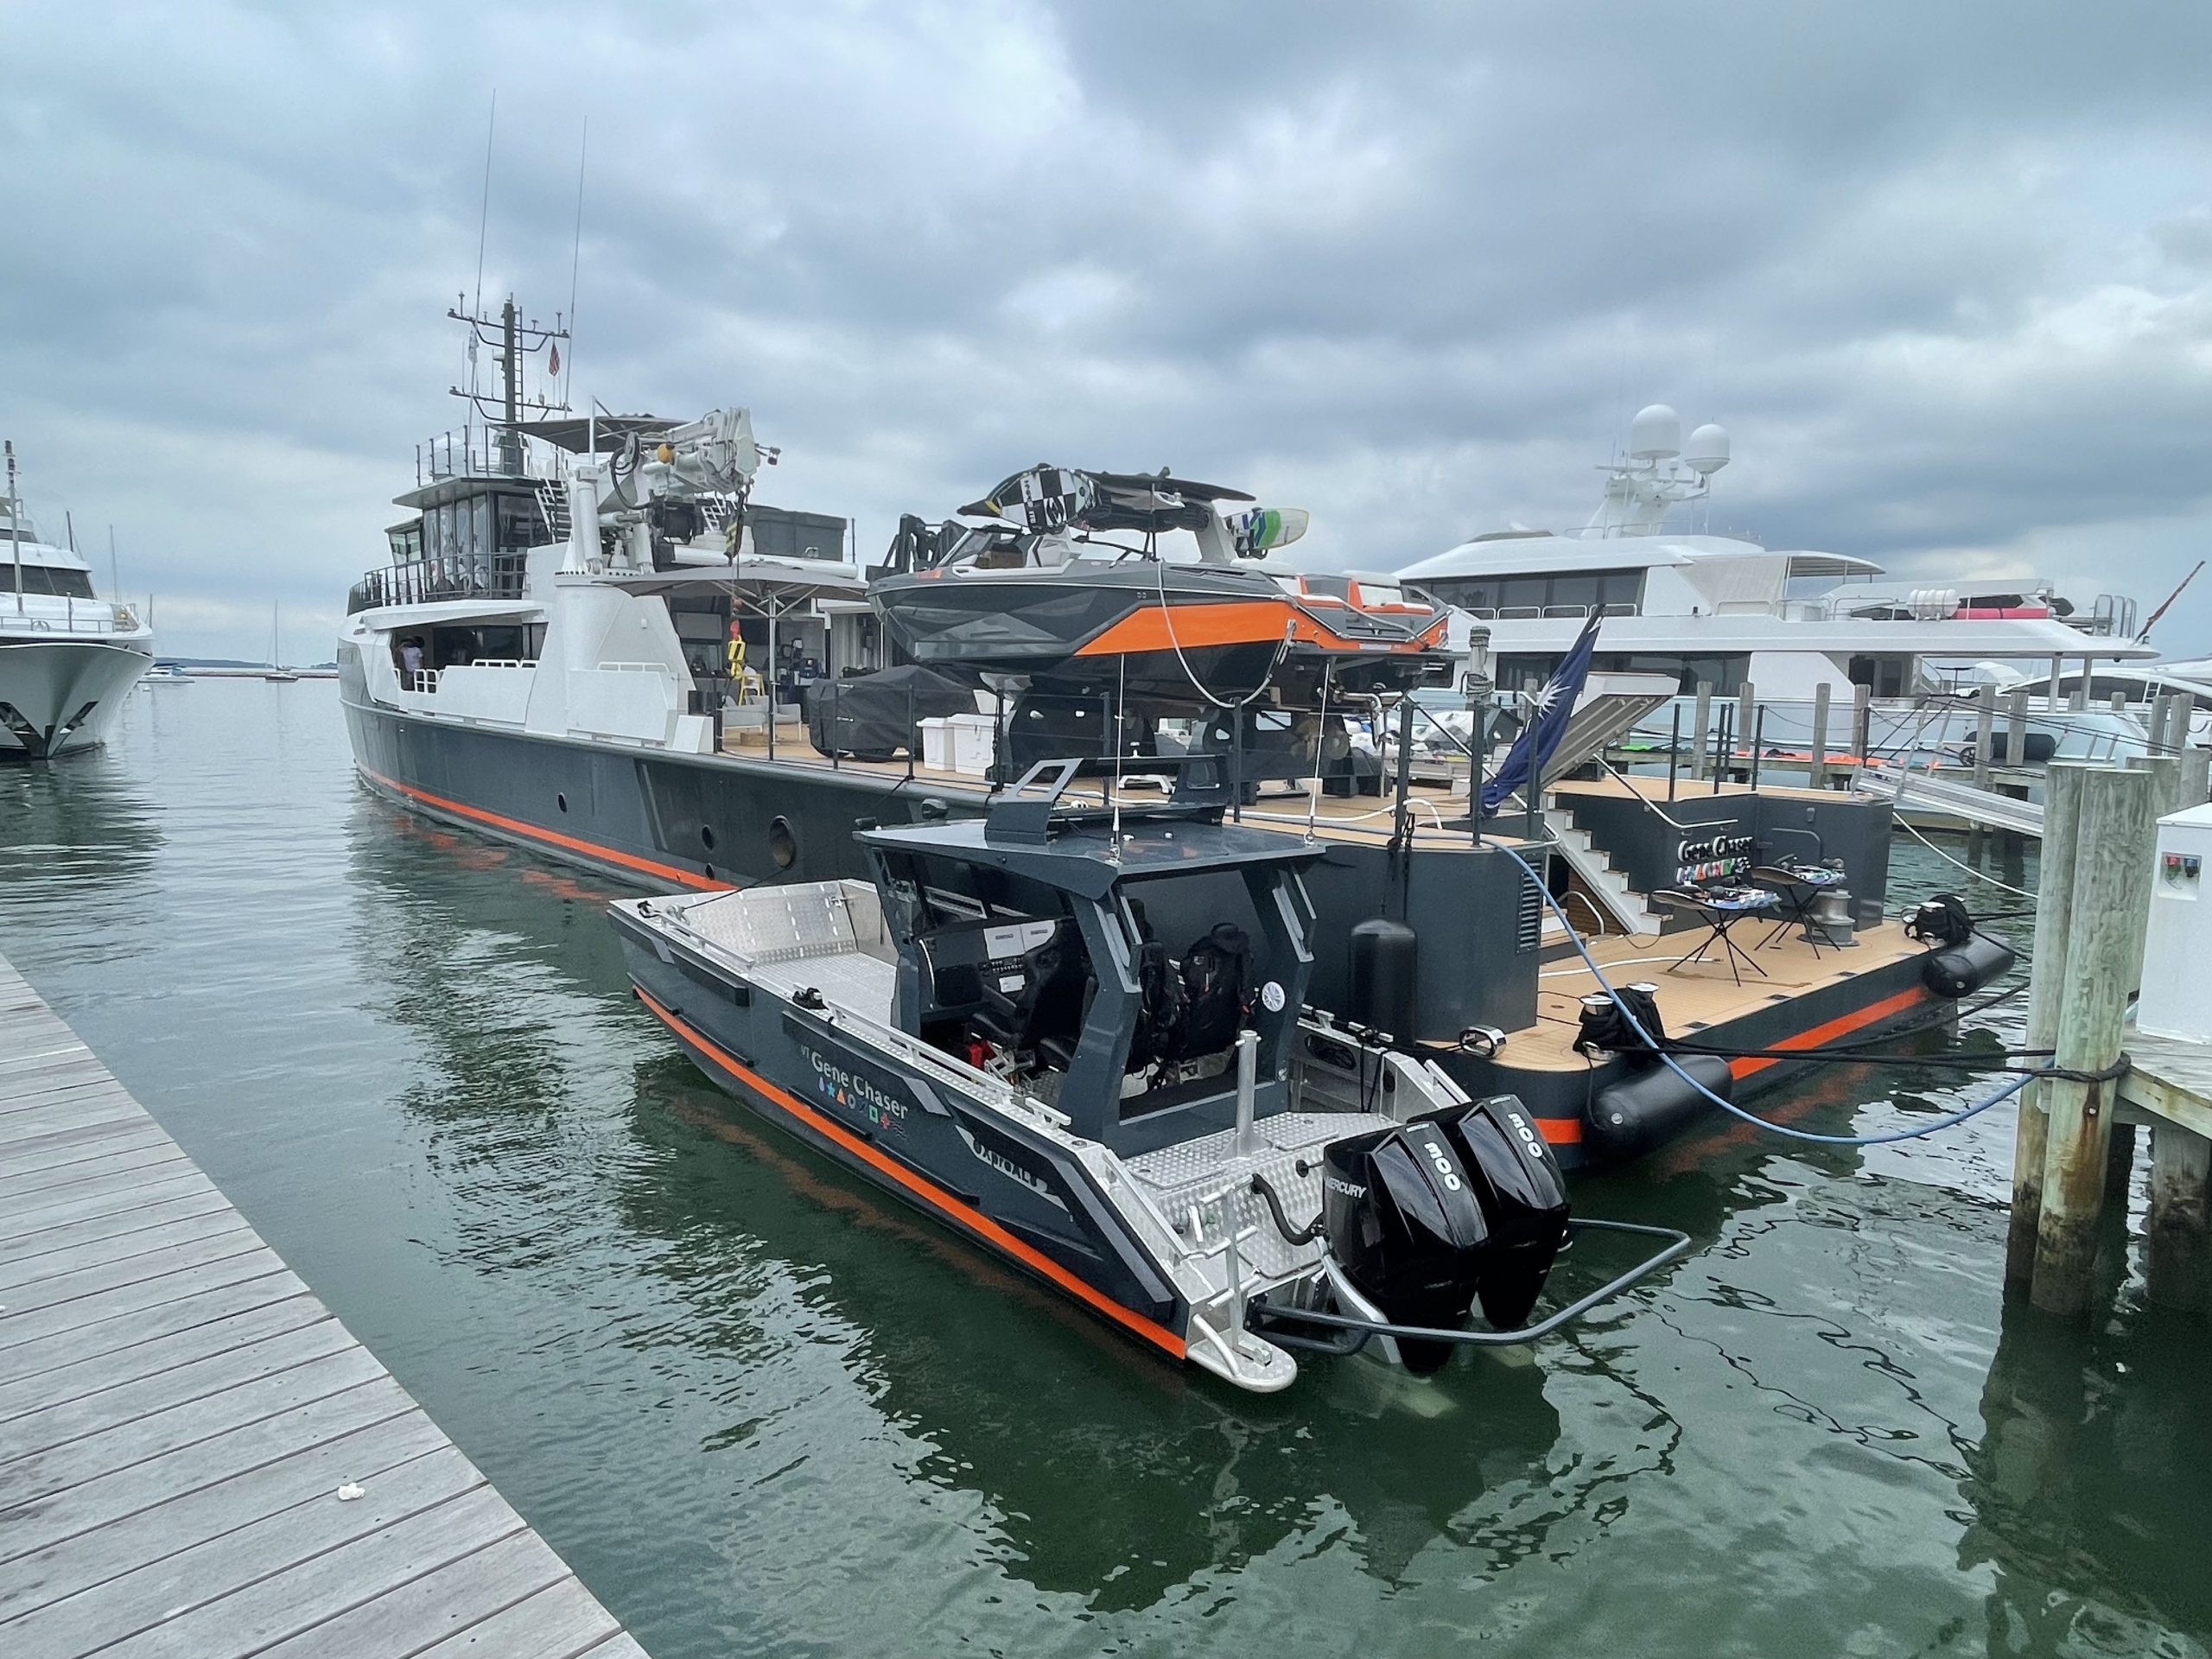 The Gene Chaser, which is moored in Sag Harbor this week, was set up by owner by Jonathan Rothberg to be a floating scientific incubator for medical startups. The 180-foot yacht is outfitted with science labs, 3D-printers and gene sequencing machines, along with a plethora of recreational 